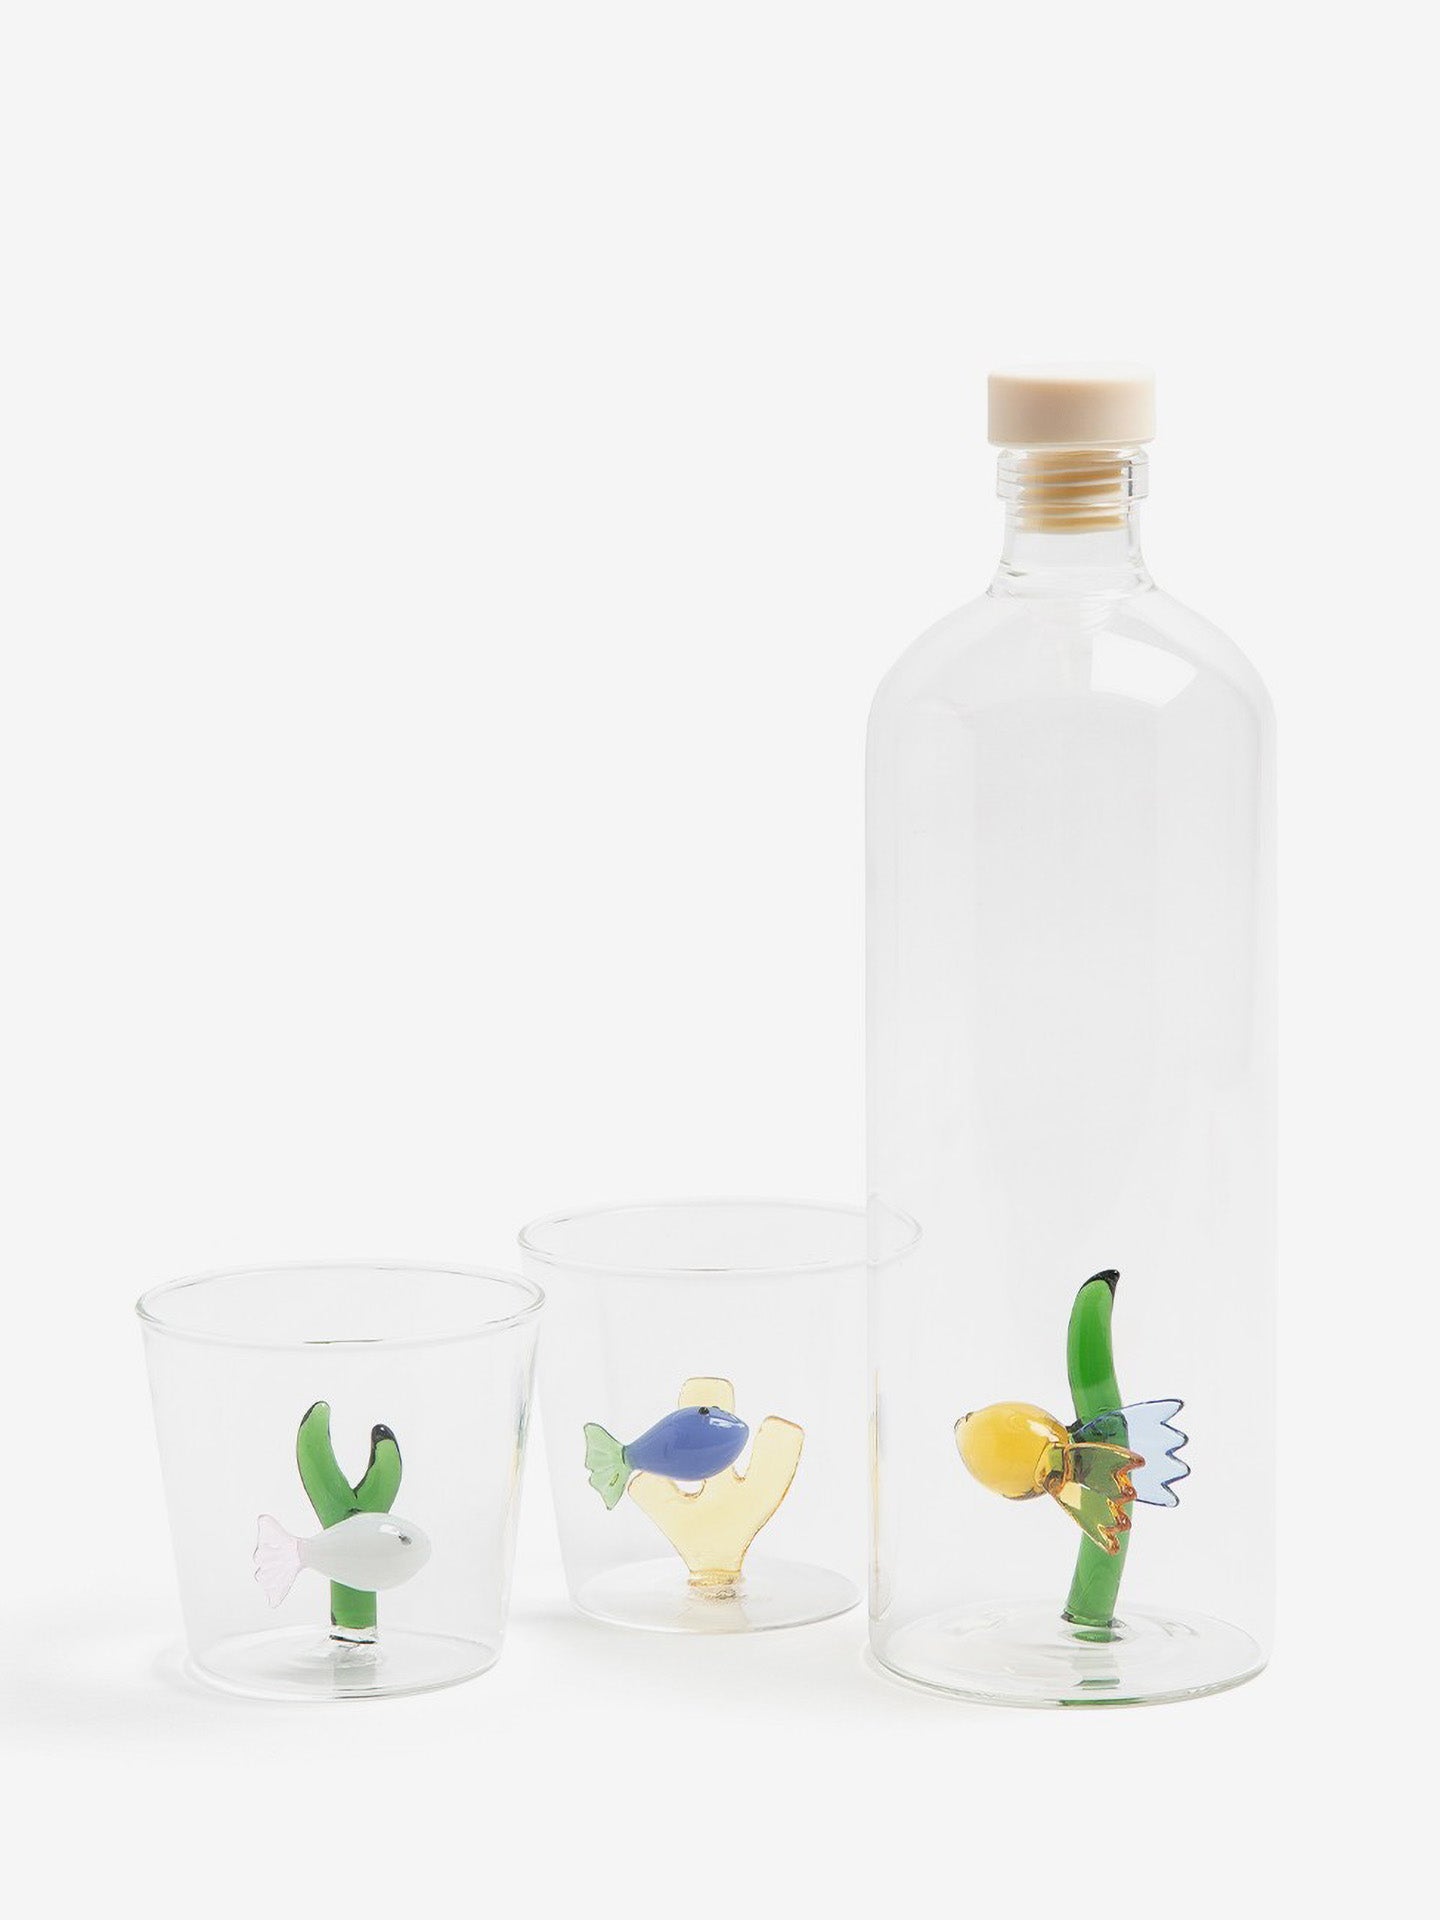 Fish & Seagrass Bottle, Animal Farm Collection